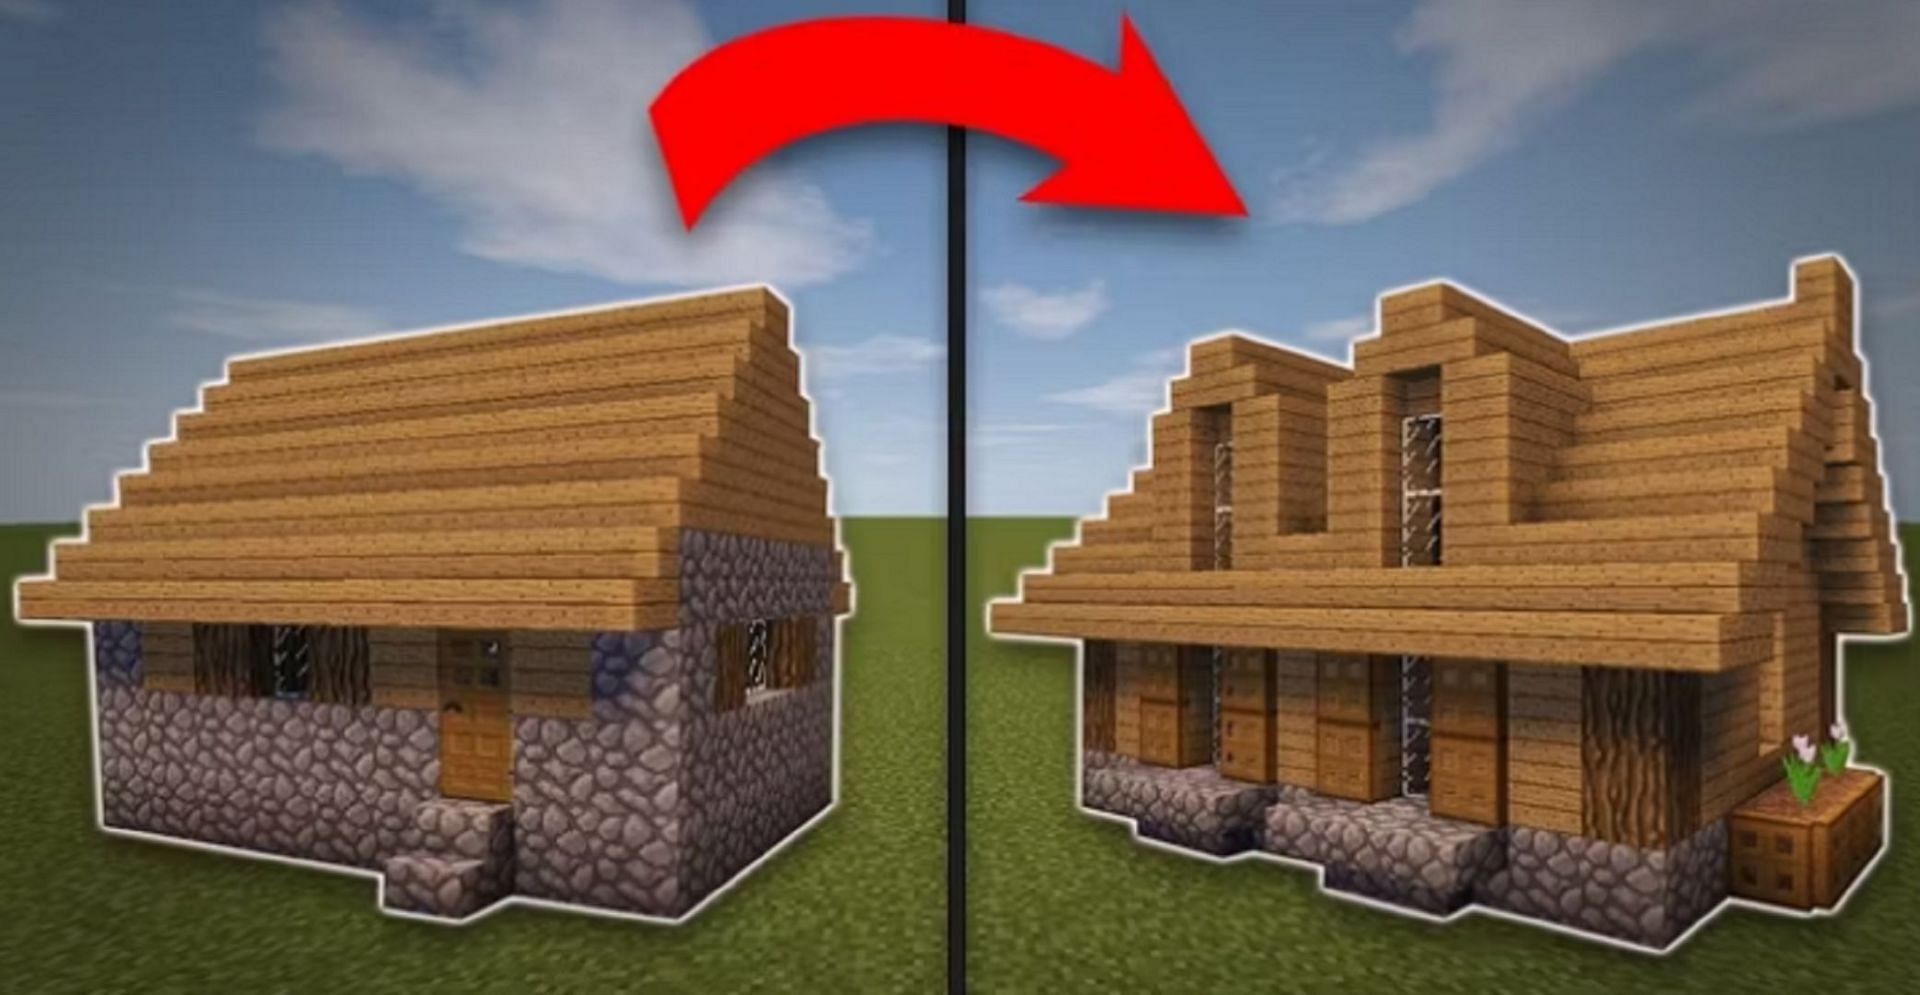 A remade villager house in Minecraft (Image via Rizzial/YouTube)